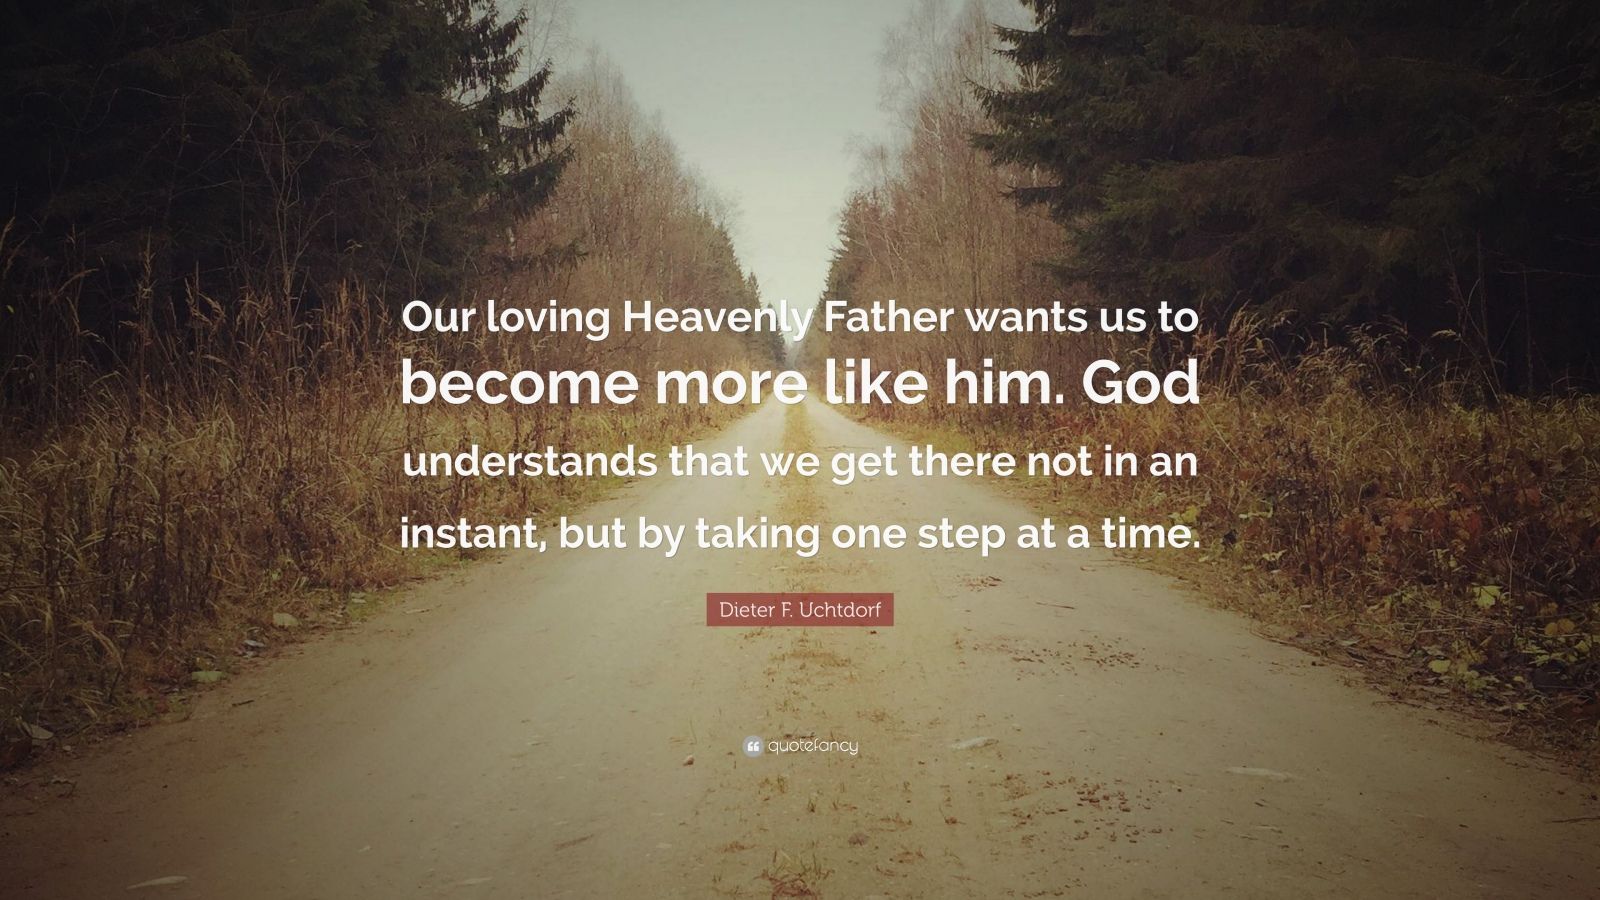 383834-Dieter-F-Uchtdorf-Quote-Our-loving-Heavenly-Father-wants-us-to.jpg